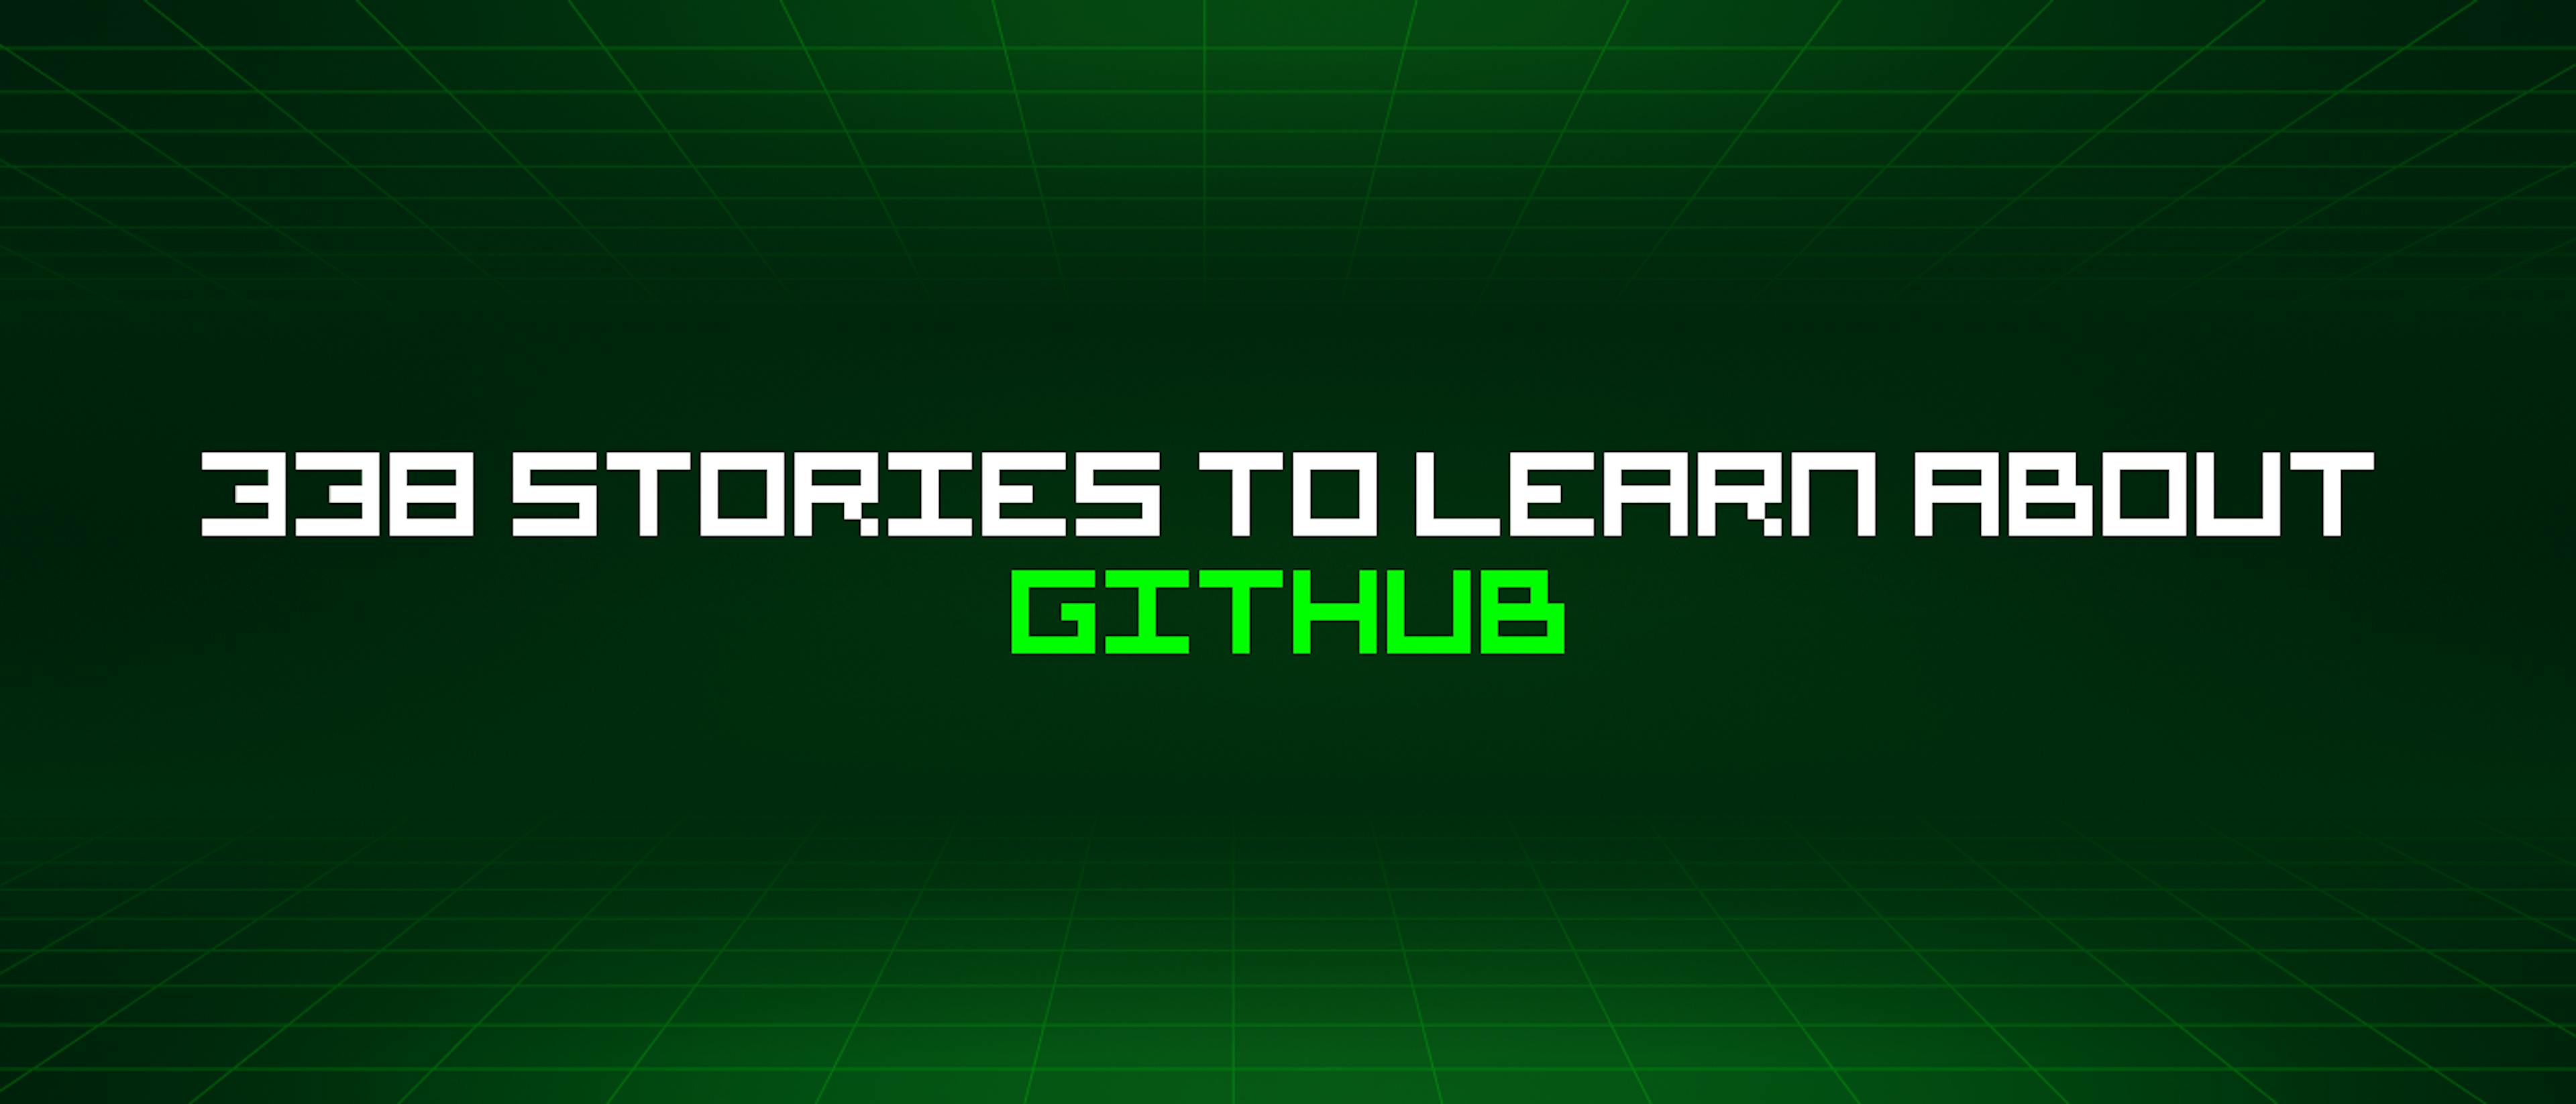 featured image - 338 Stories To Learn About Github